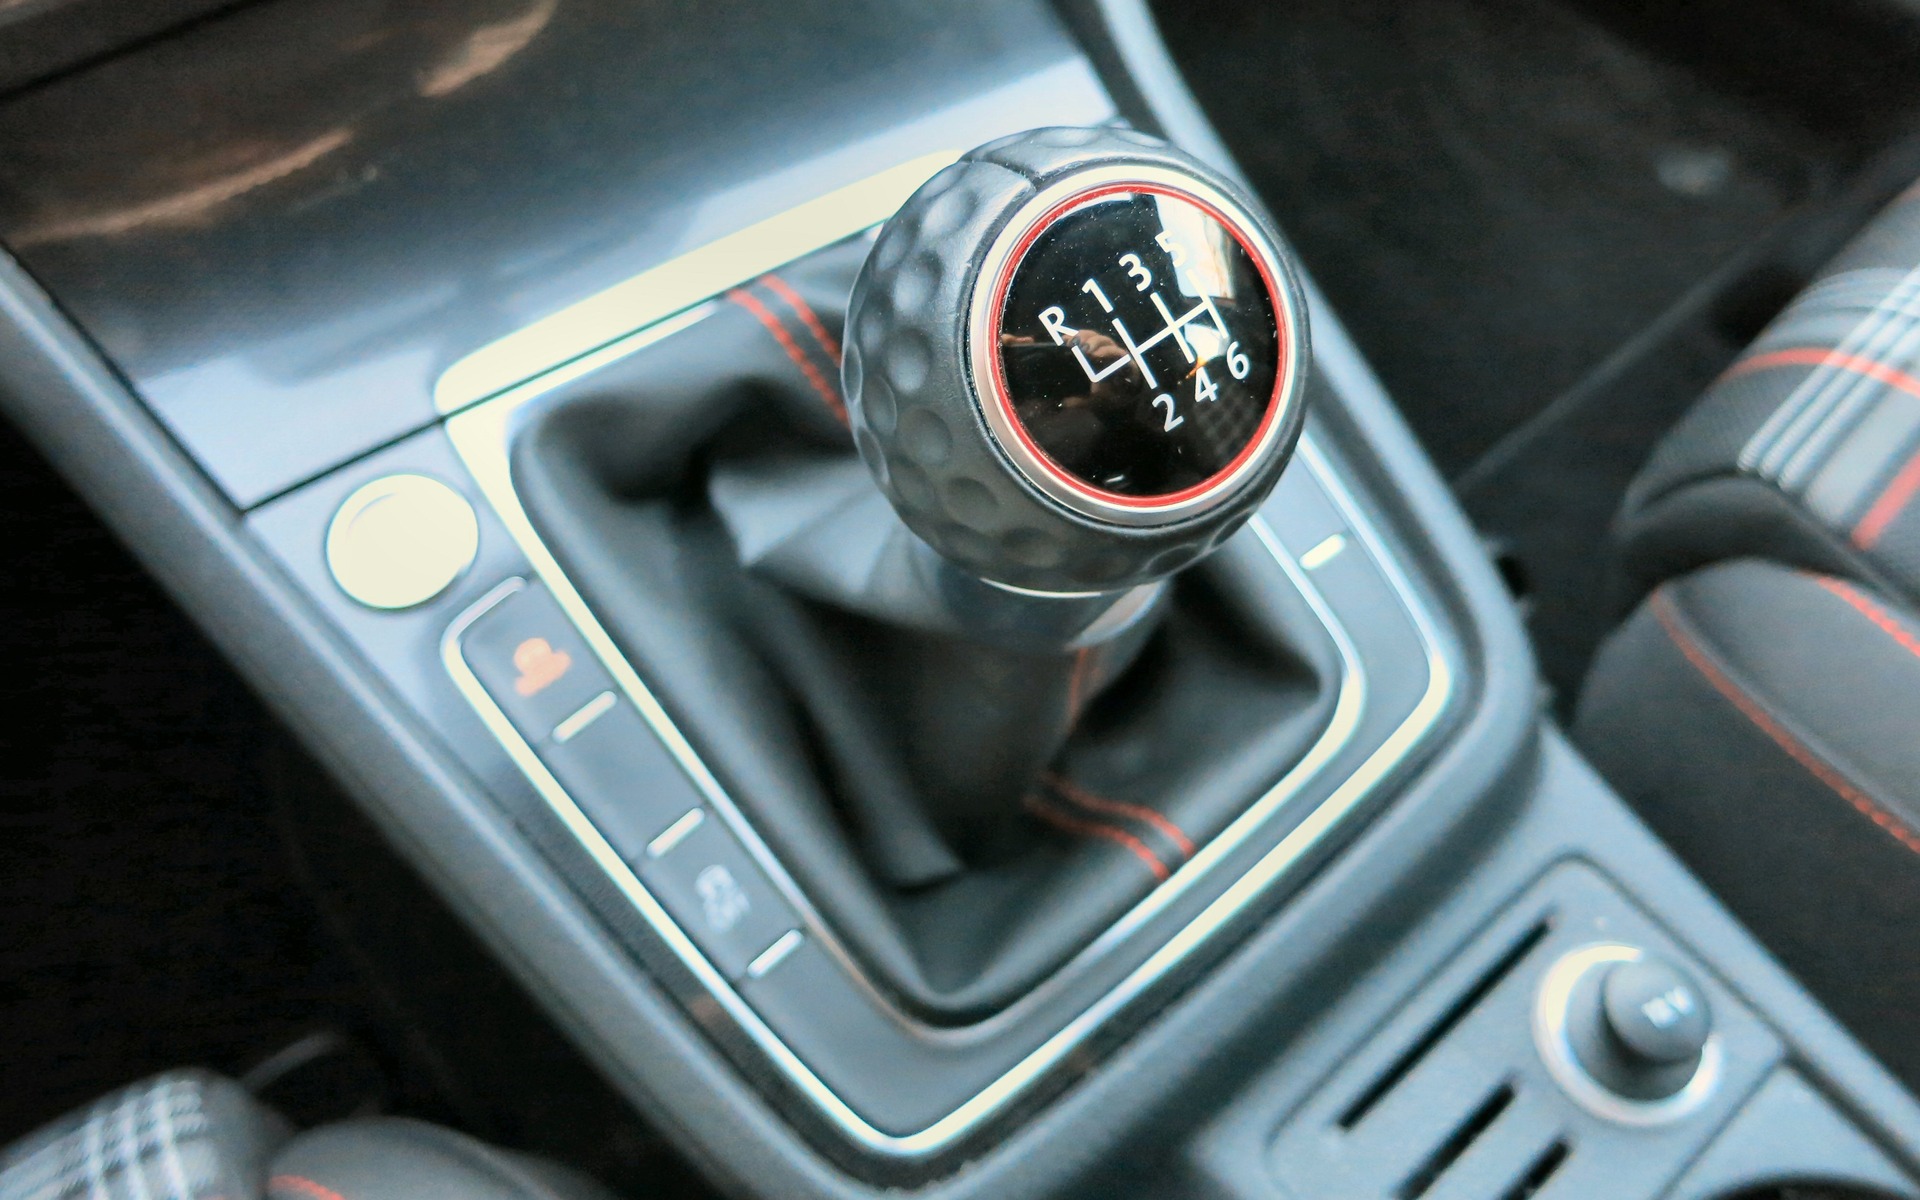 Note the traditional golfball shifter.